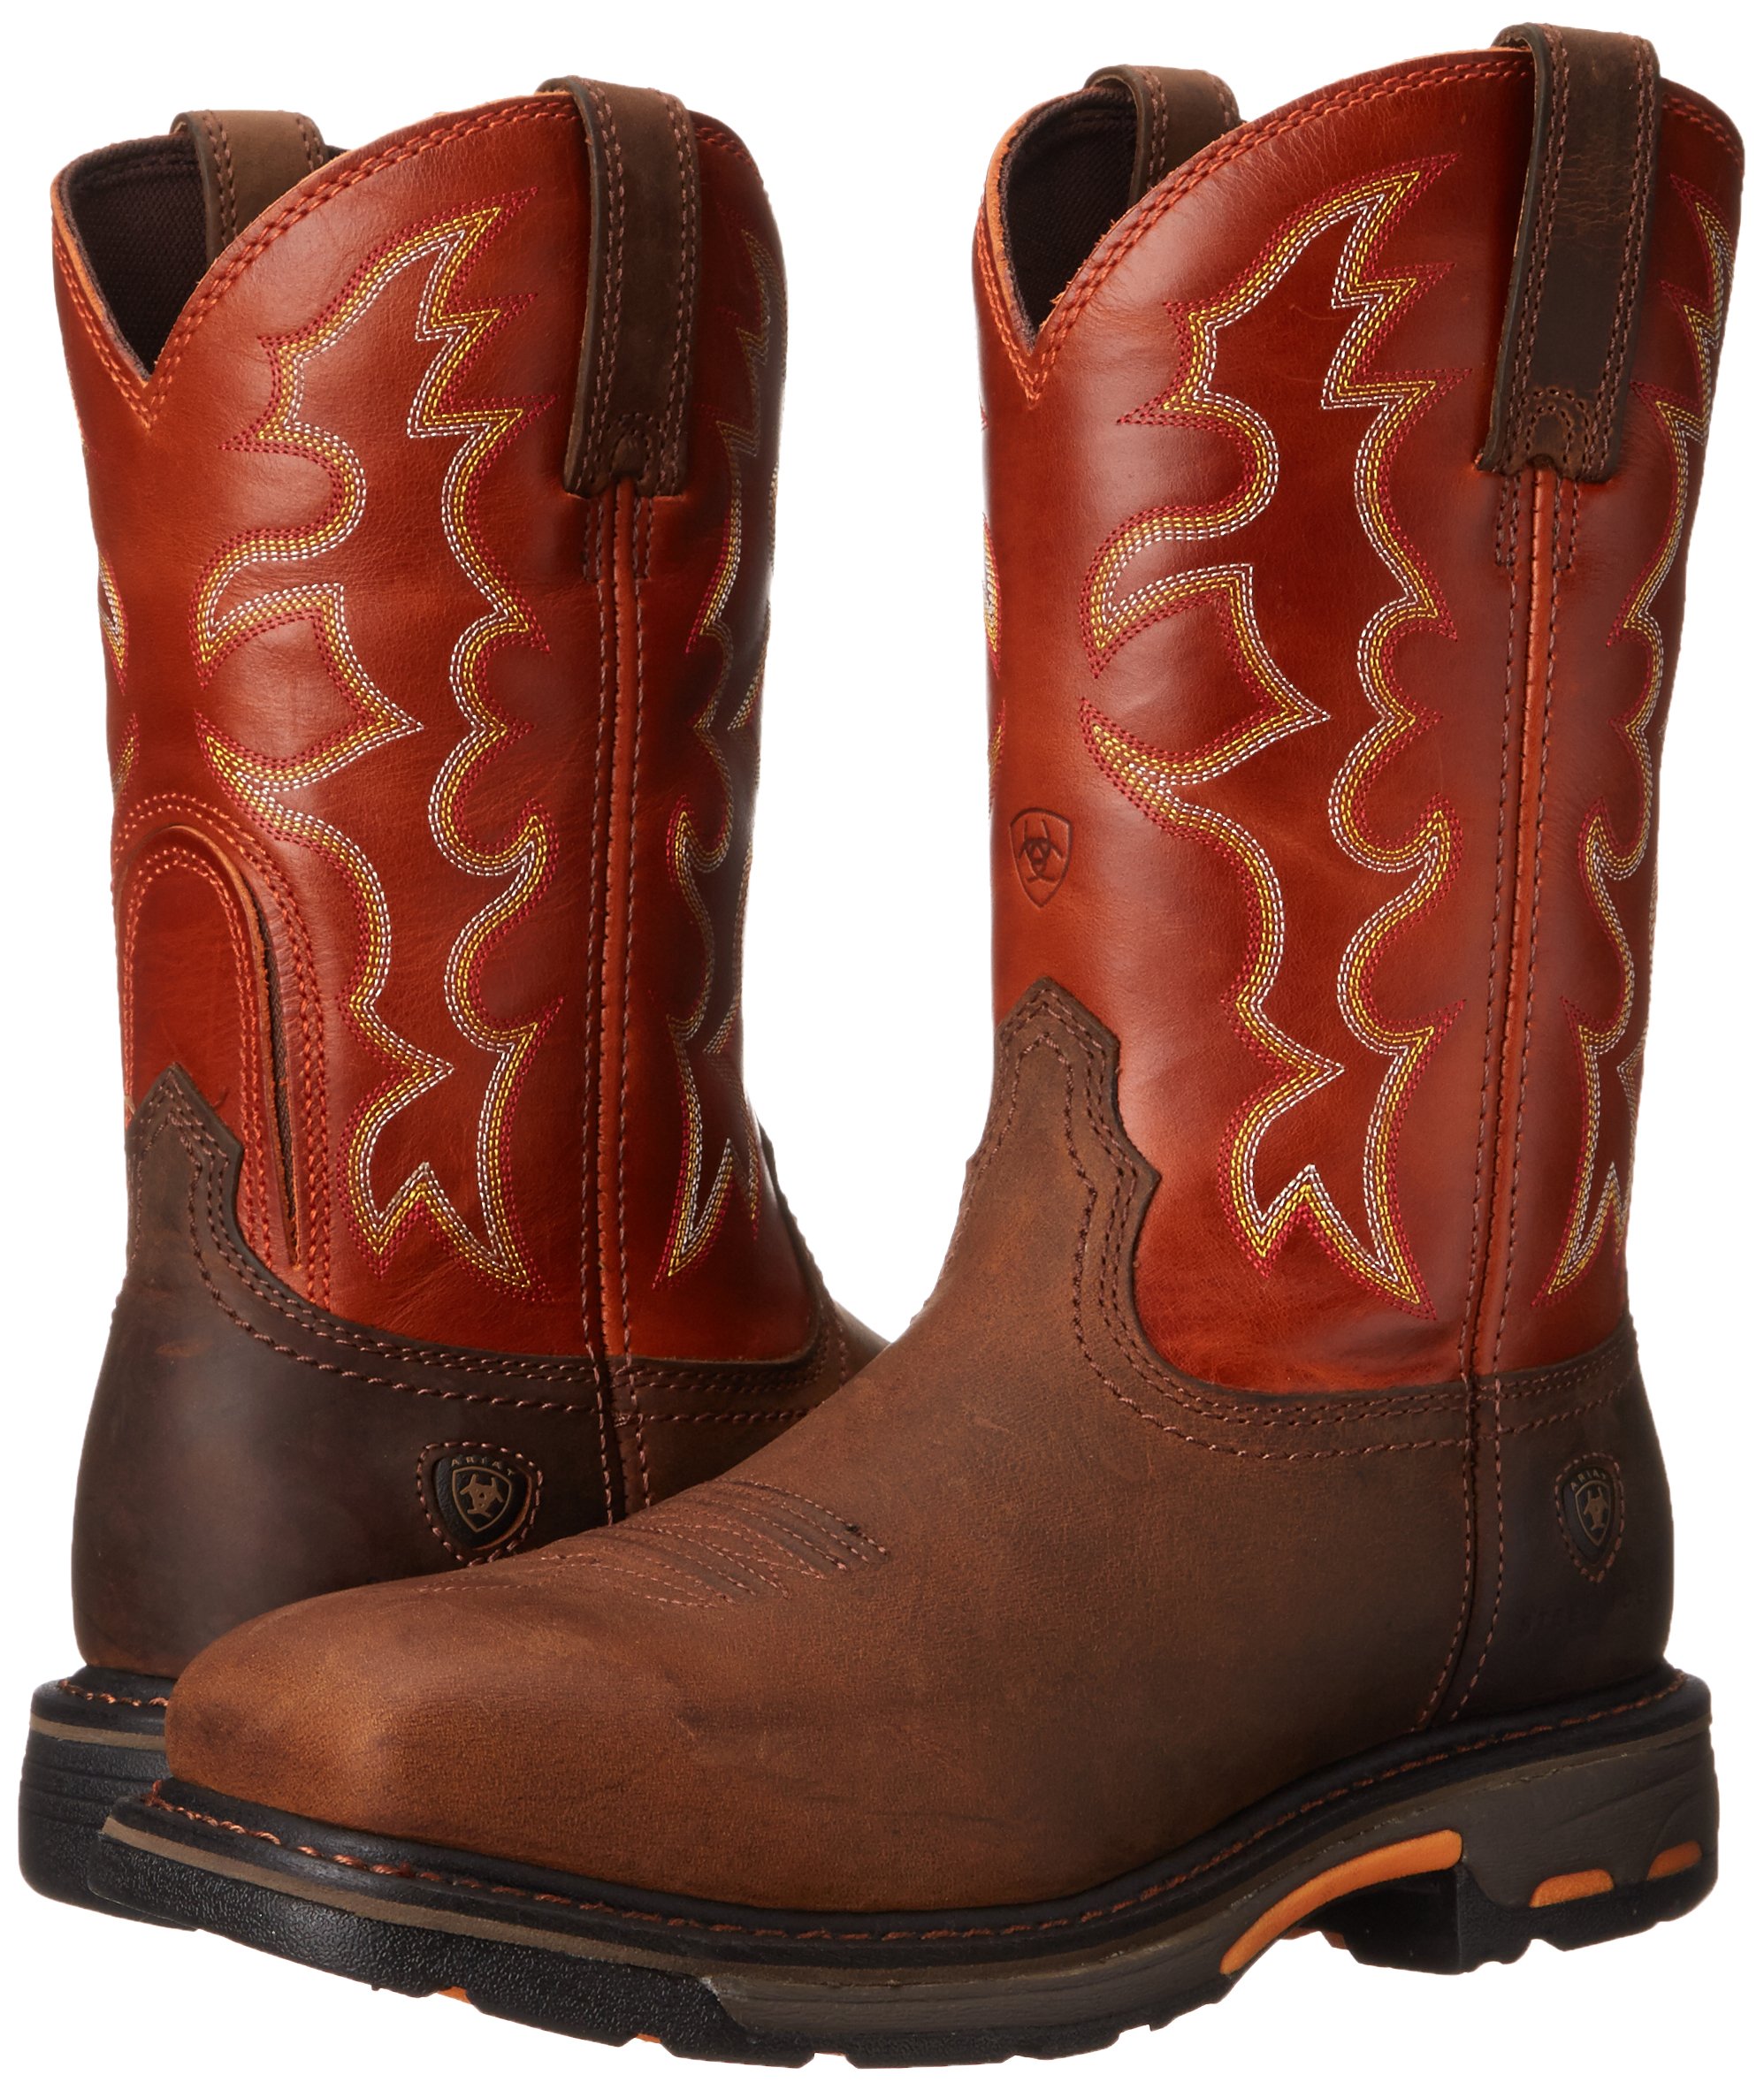 Ariat Men's Workhog Wide Square Toe Tall Steel Toe Work Boot